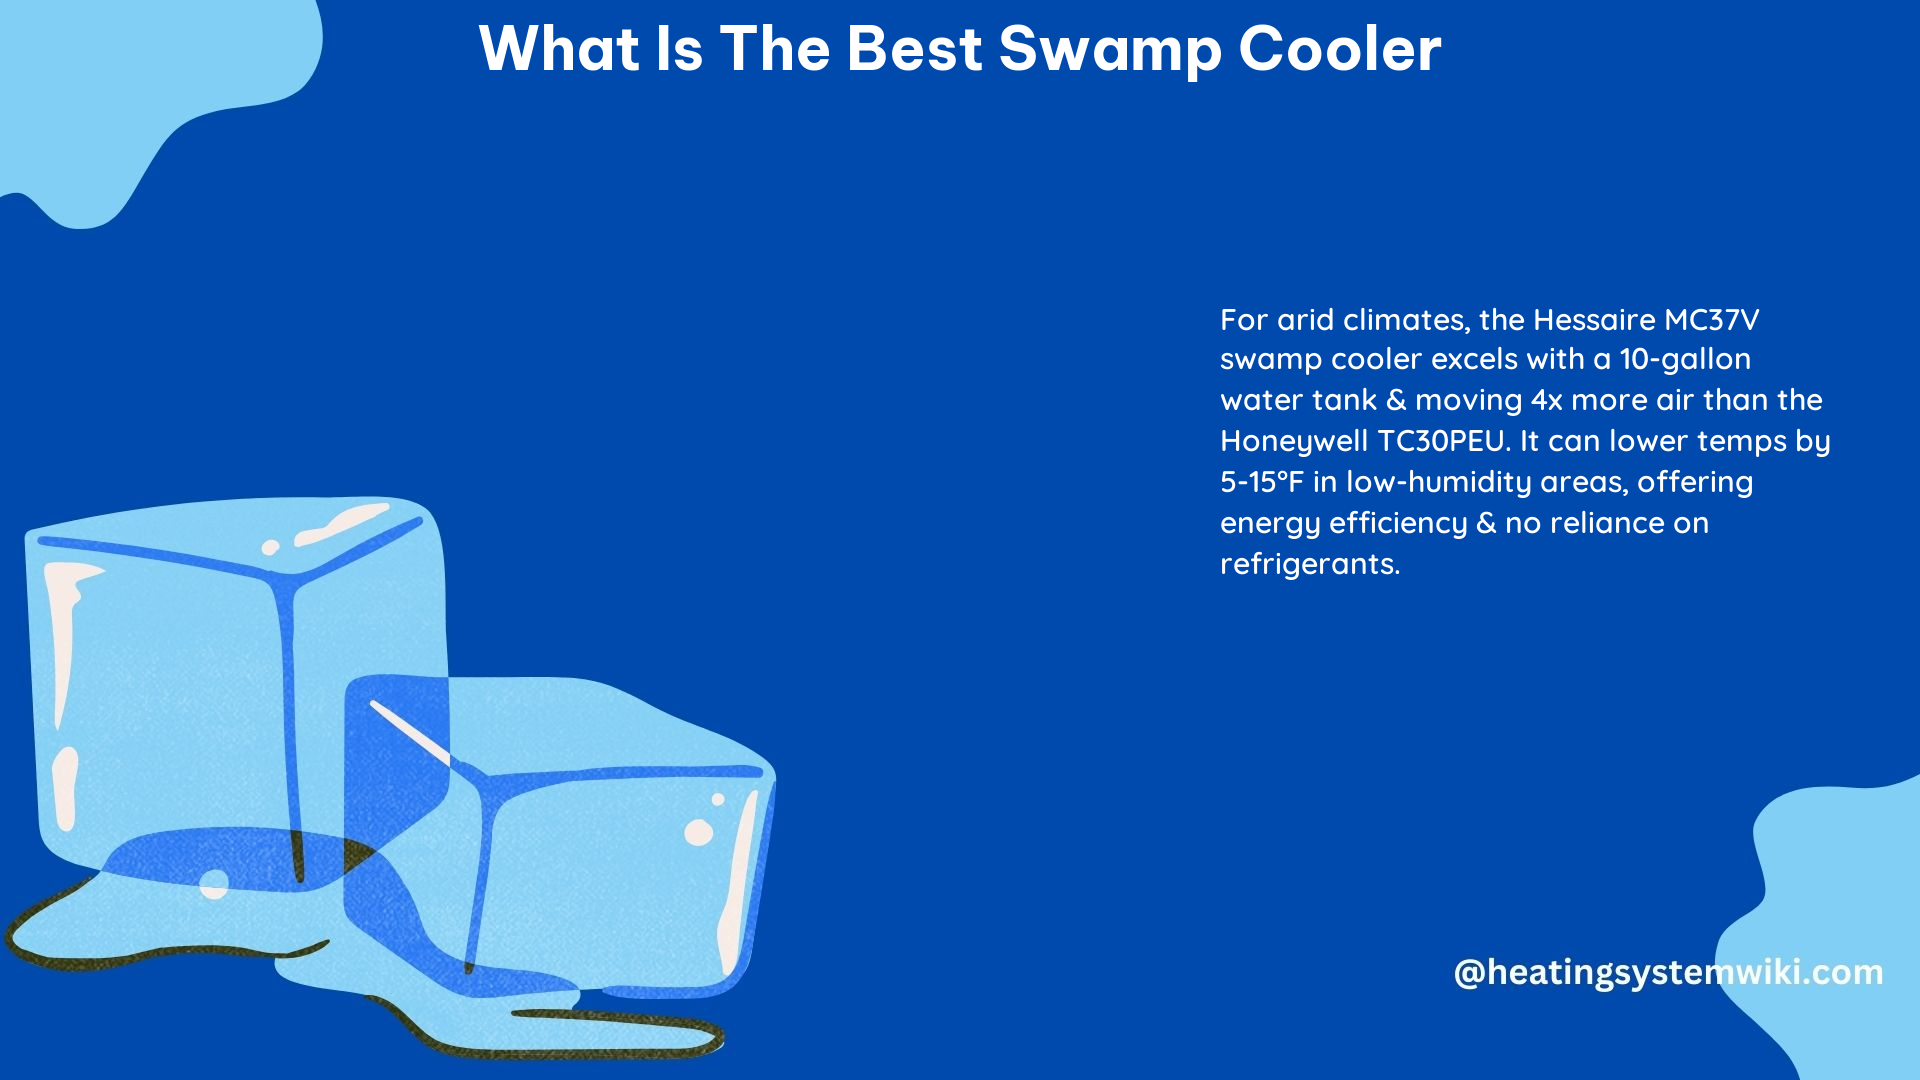 What Is the Best Swamp Cooler